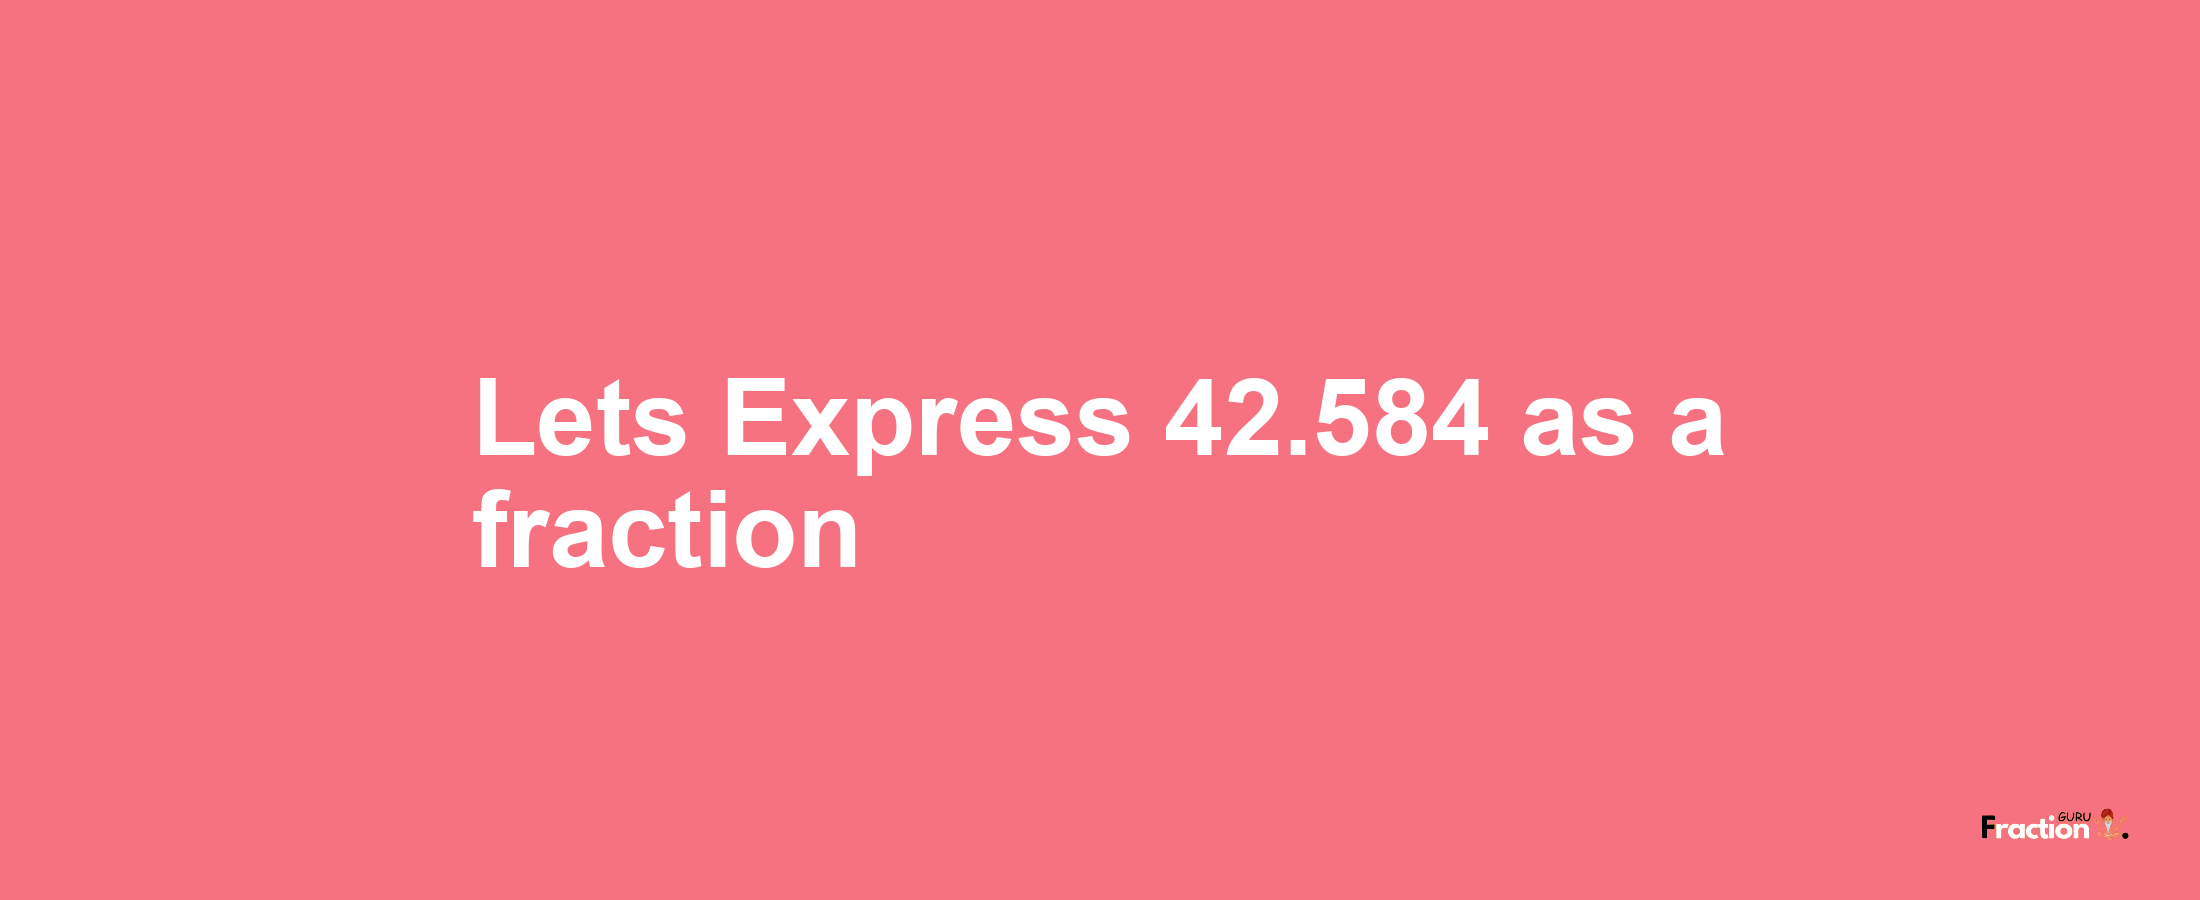 Lets Express 42.584 as afraction